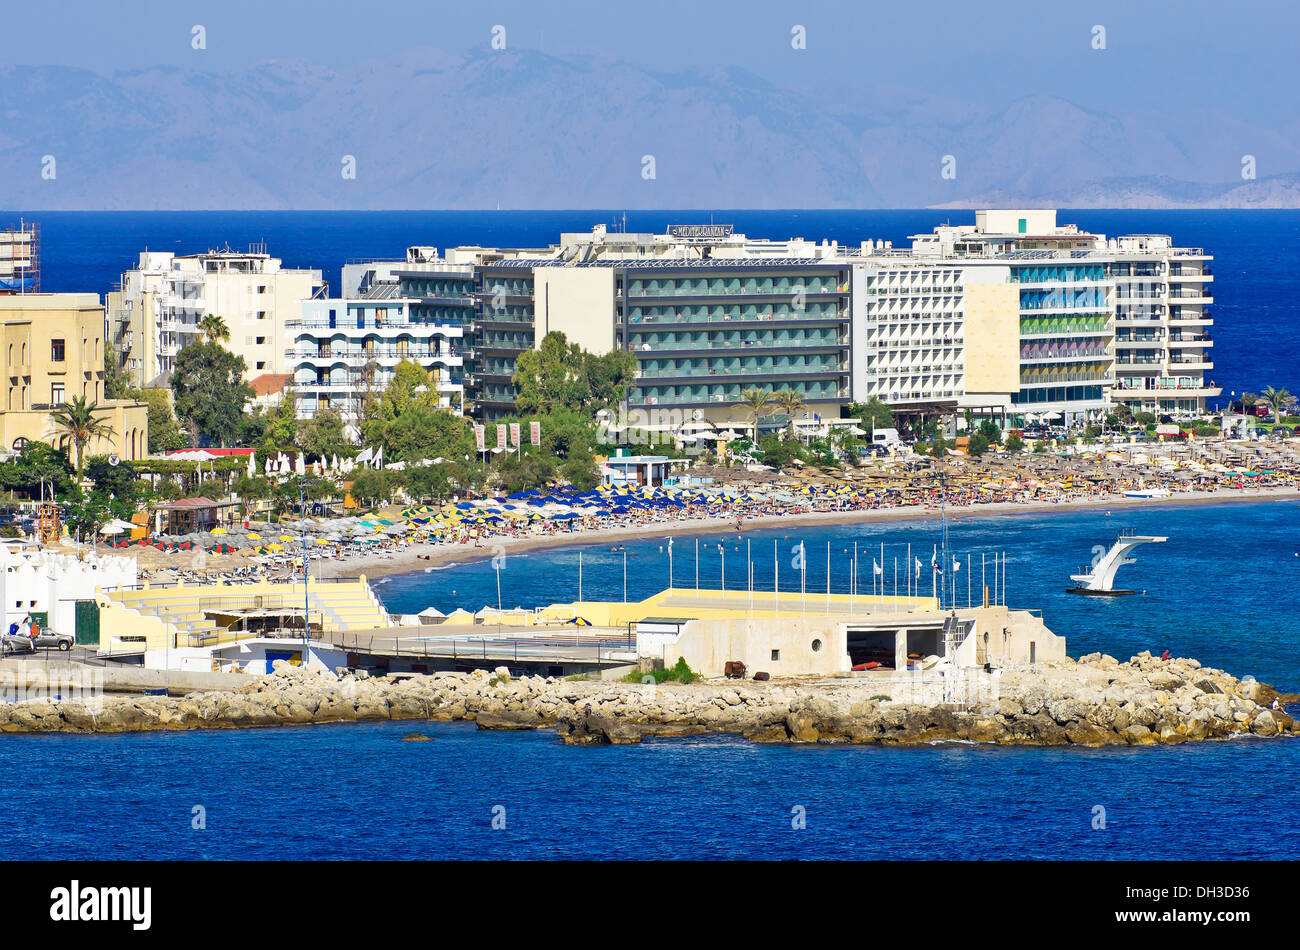 Hotel complex with a beach area, Rhodes, Rhodos Island, Dodecanese, Greece Stock Photo